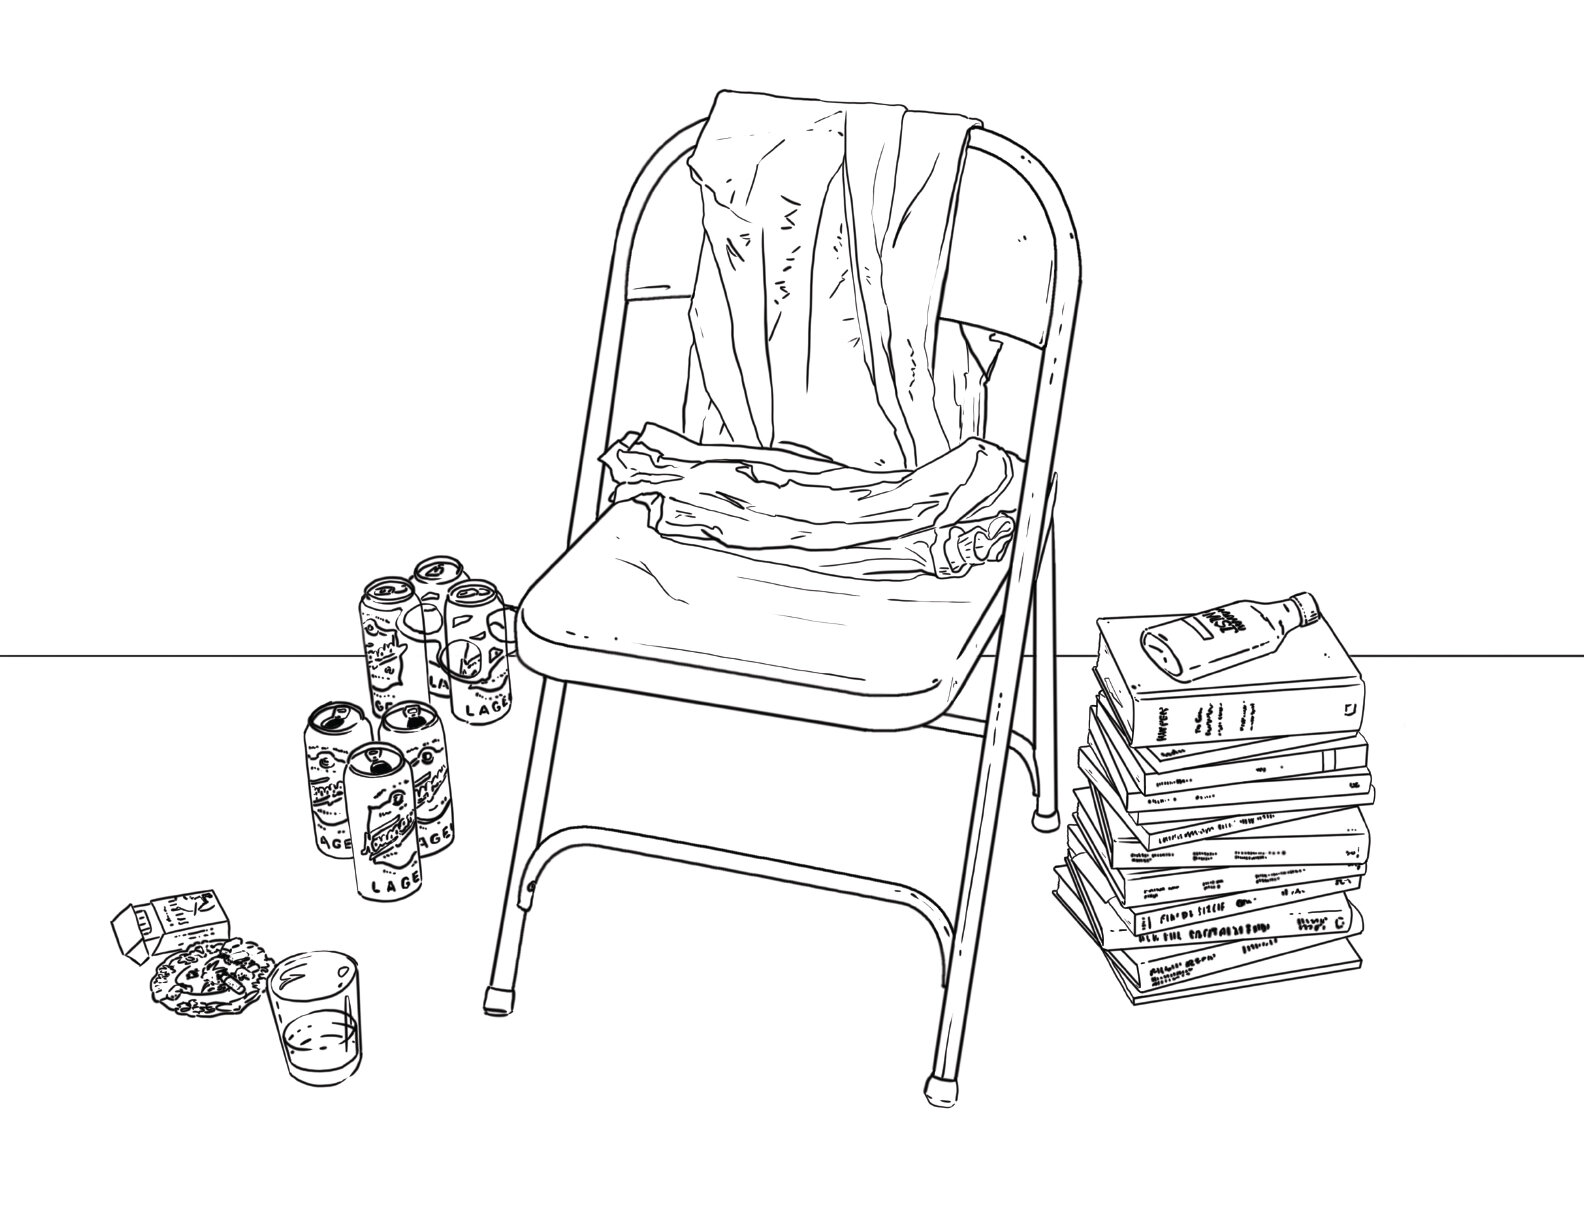 In Conversation (Chair Drawing)